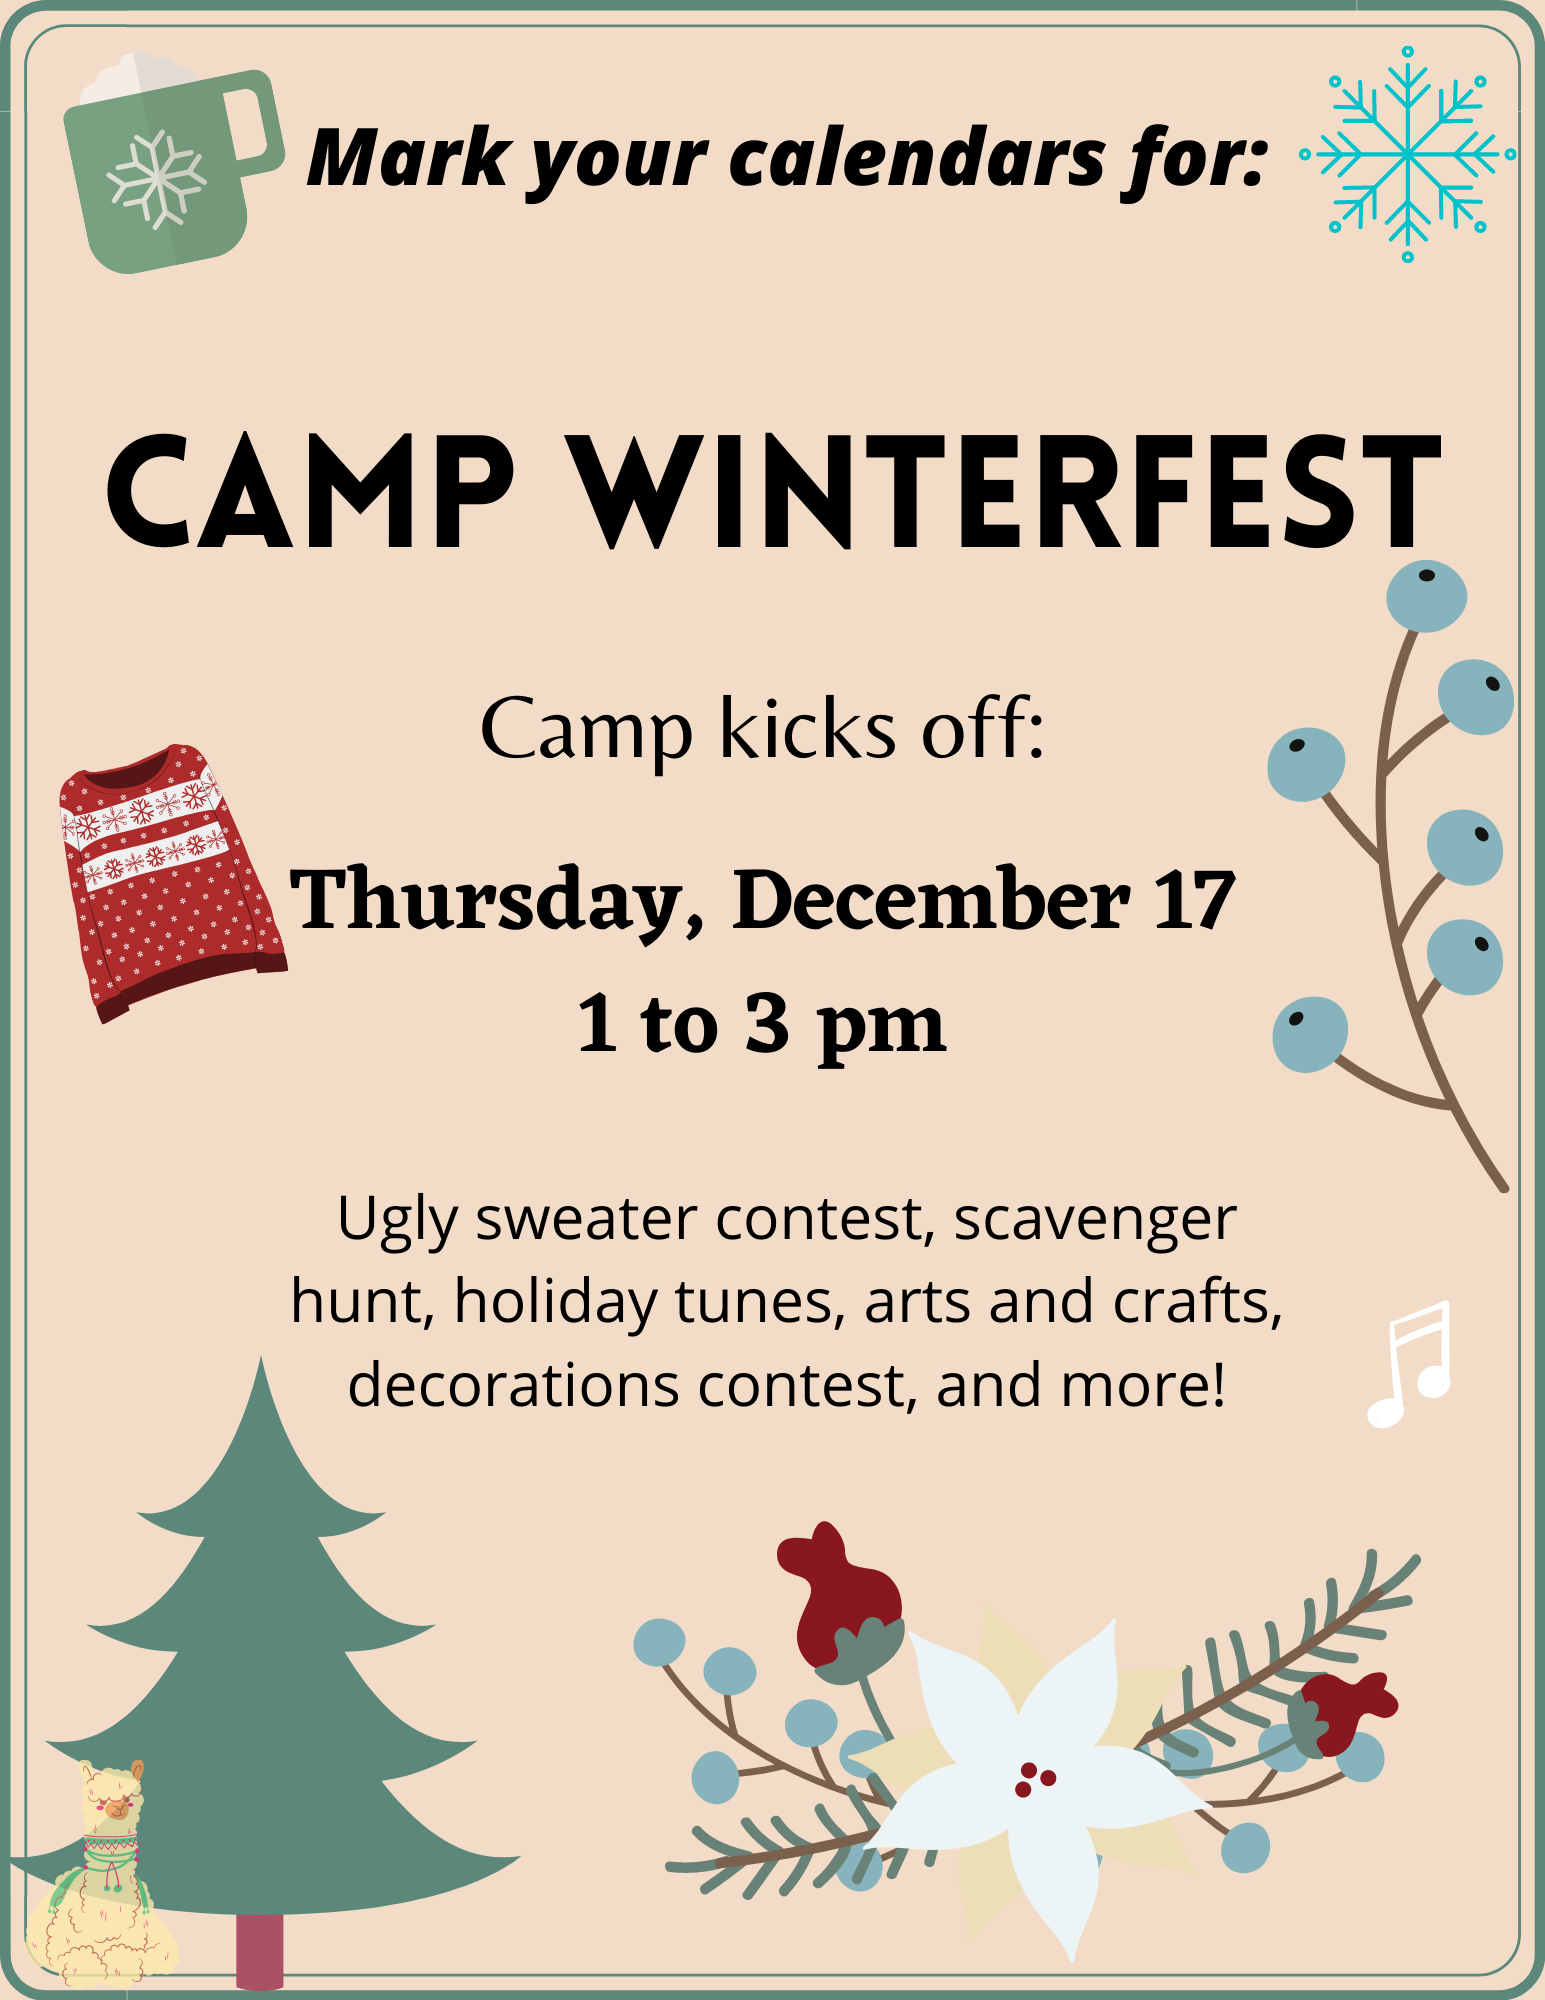 A flyer with various holiday images, including flowers, musical notes, holiday sweater, and holiday tree. The text reads: "Mark your calendars for Camp Winterfest! Camp kicks off Thursday December 17 1 to 3 pm. Ugly sweater contest, scavenger hunt, holiday tunes, arts and crafts, decorations contest, and more!"